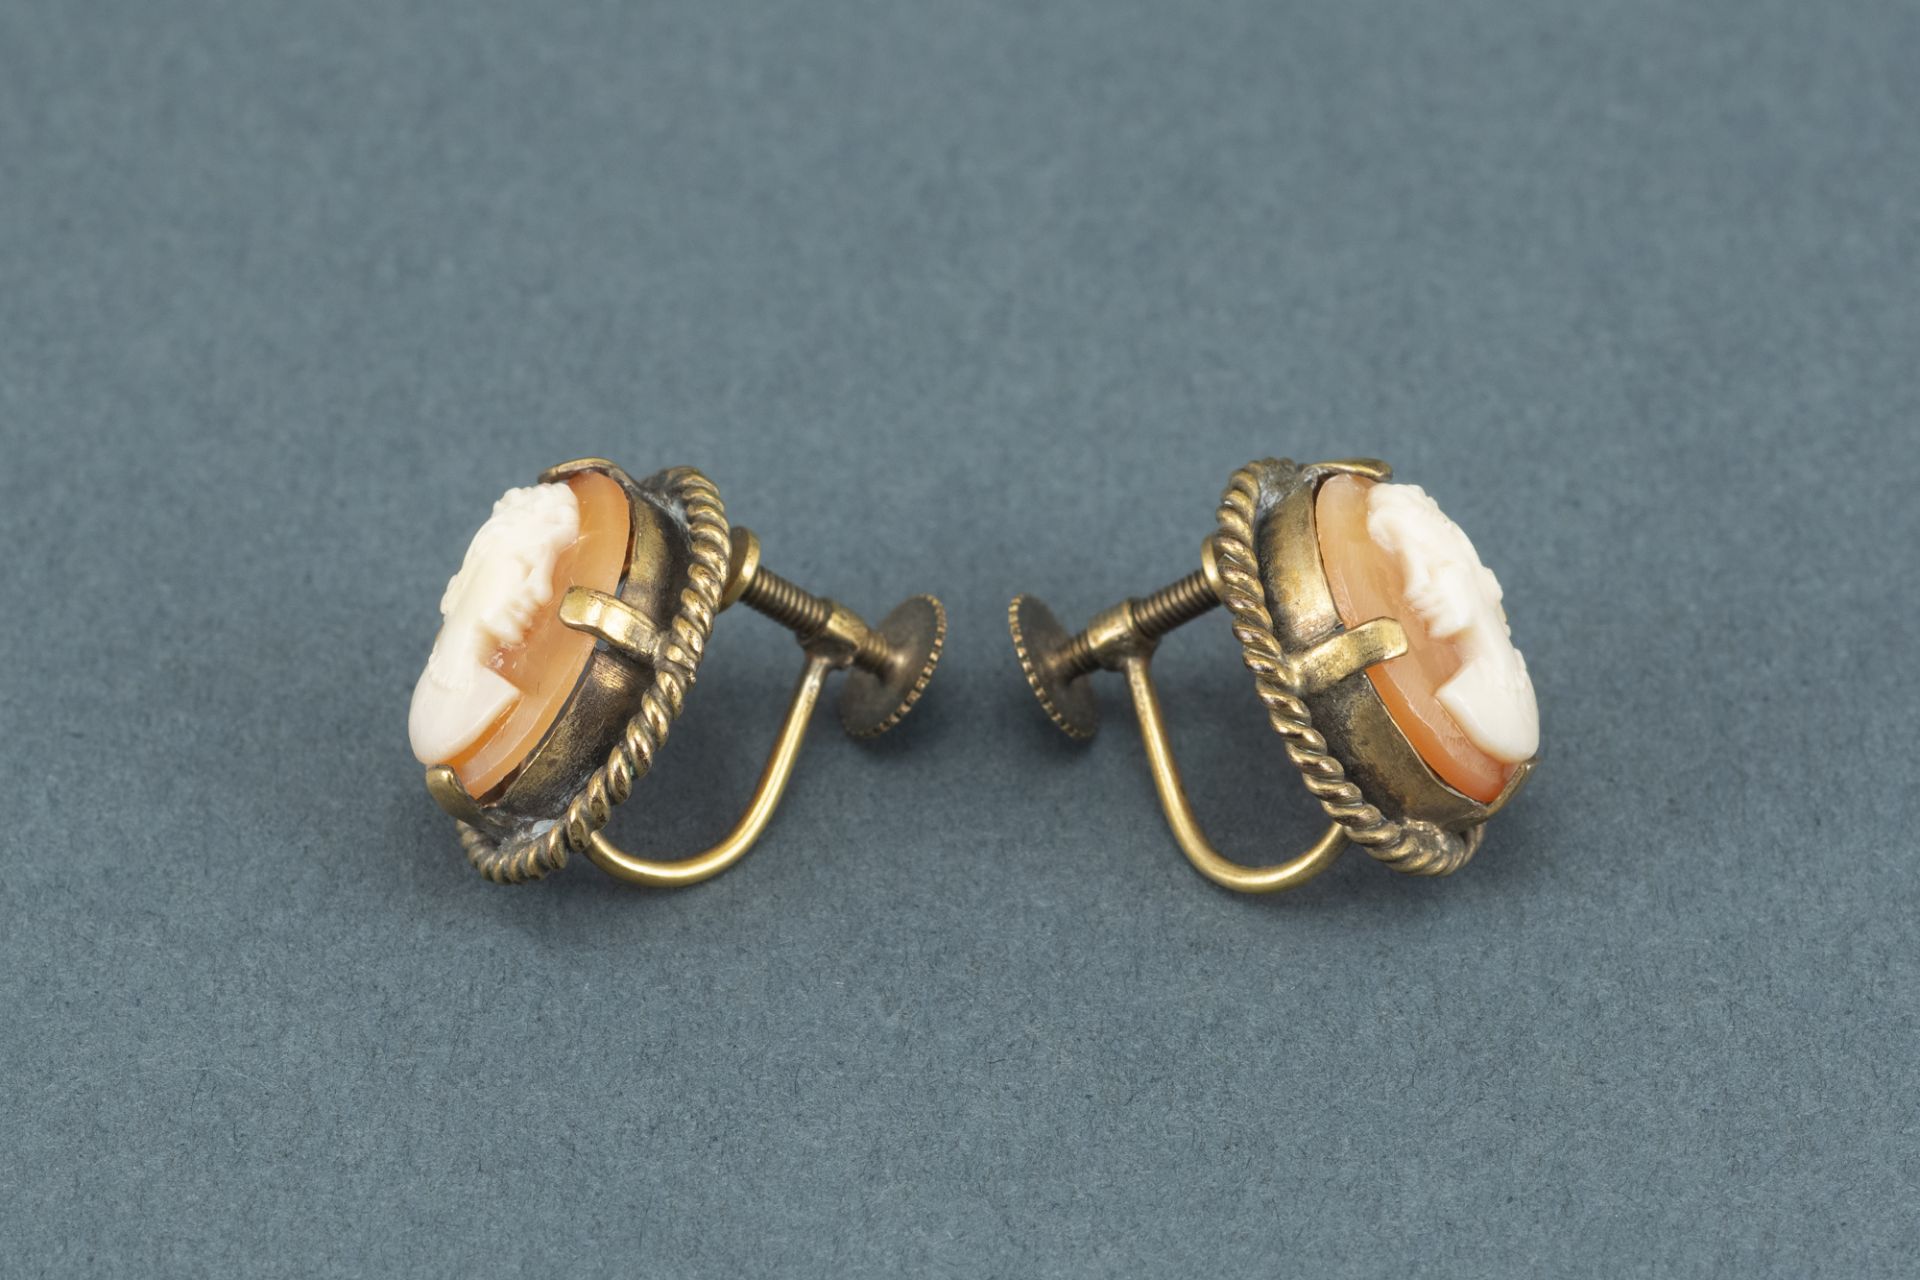 Shell cameo gold earrings - Image 4 of 4